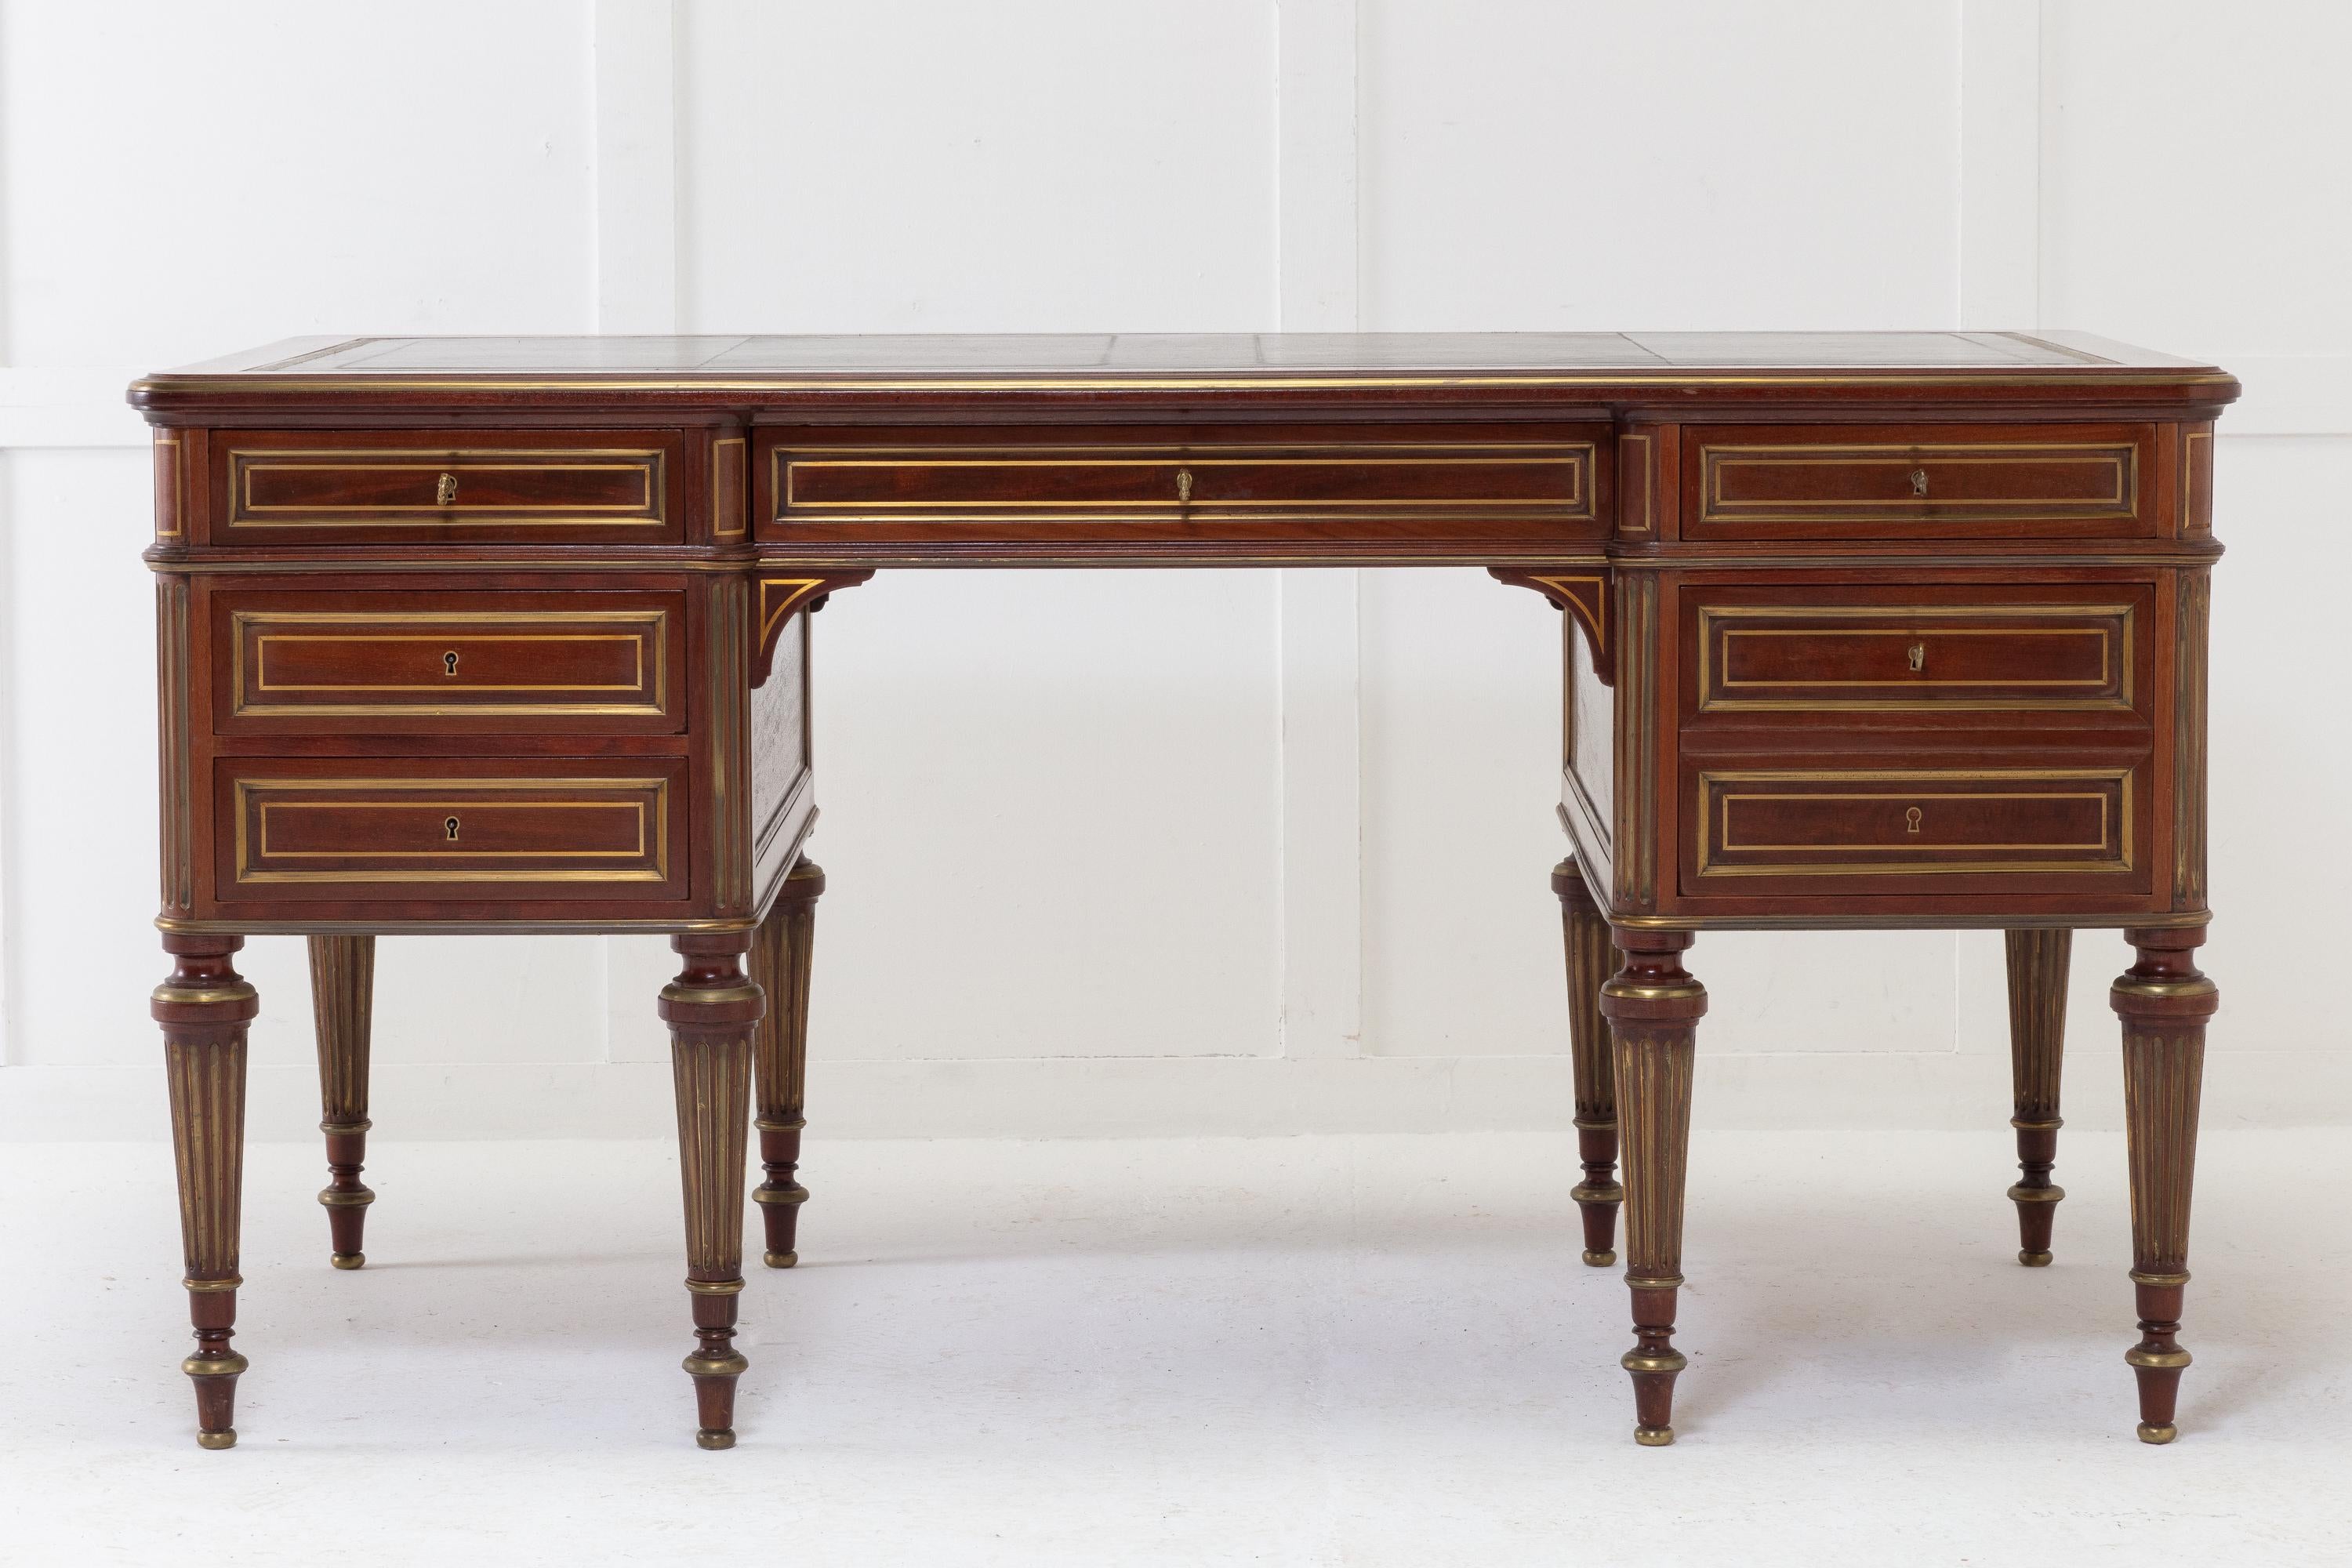 Fine 19th century French brass inlaid mahogany desk of exceptional quality. Having old tooled leather and brass moulding to the top and with seven brass inlaid and moulded drawers. The sides are also brass inlaid and brass moulded. Having two pull